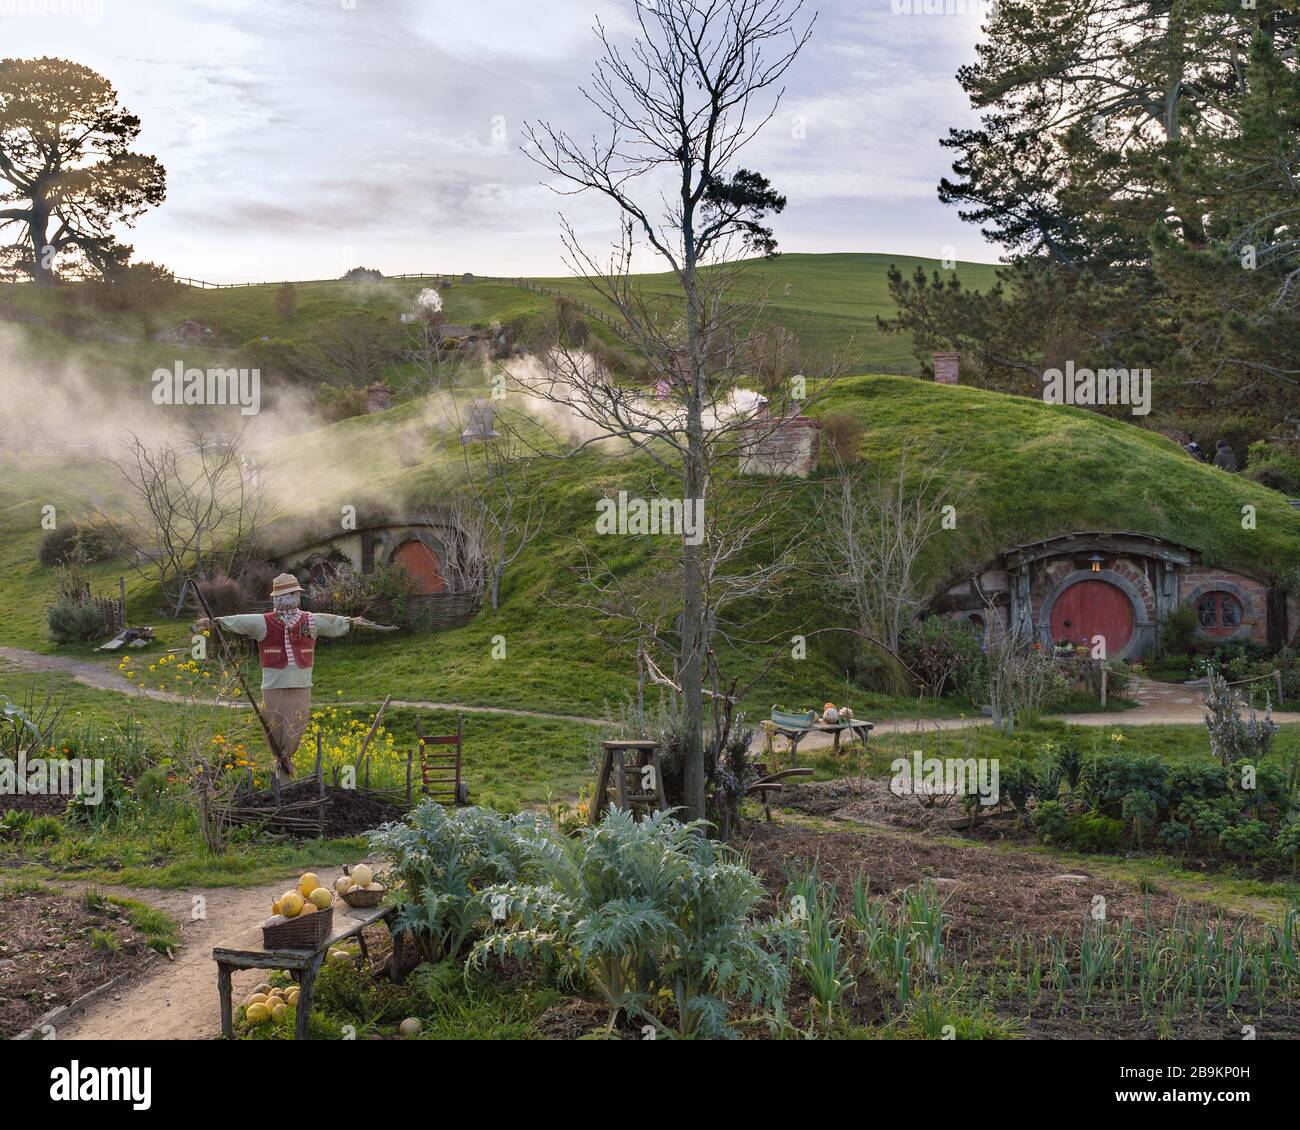 A scarecrow guards the vegetable garden at the Hobbiton Movie Set, New Zealand Stock Photo